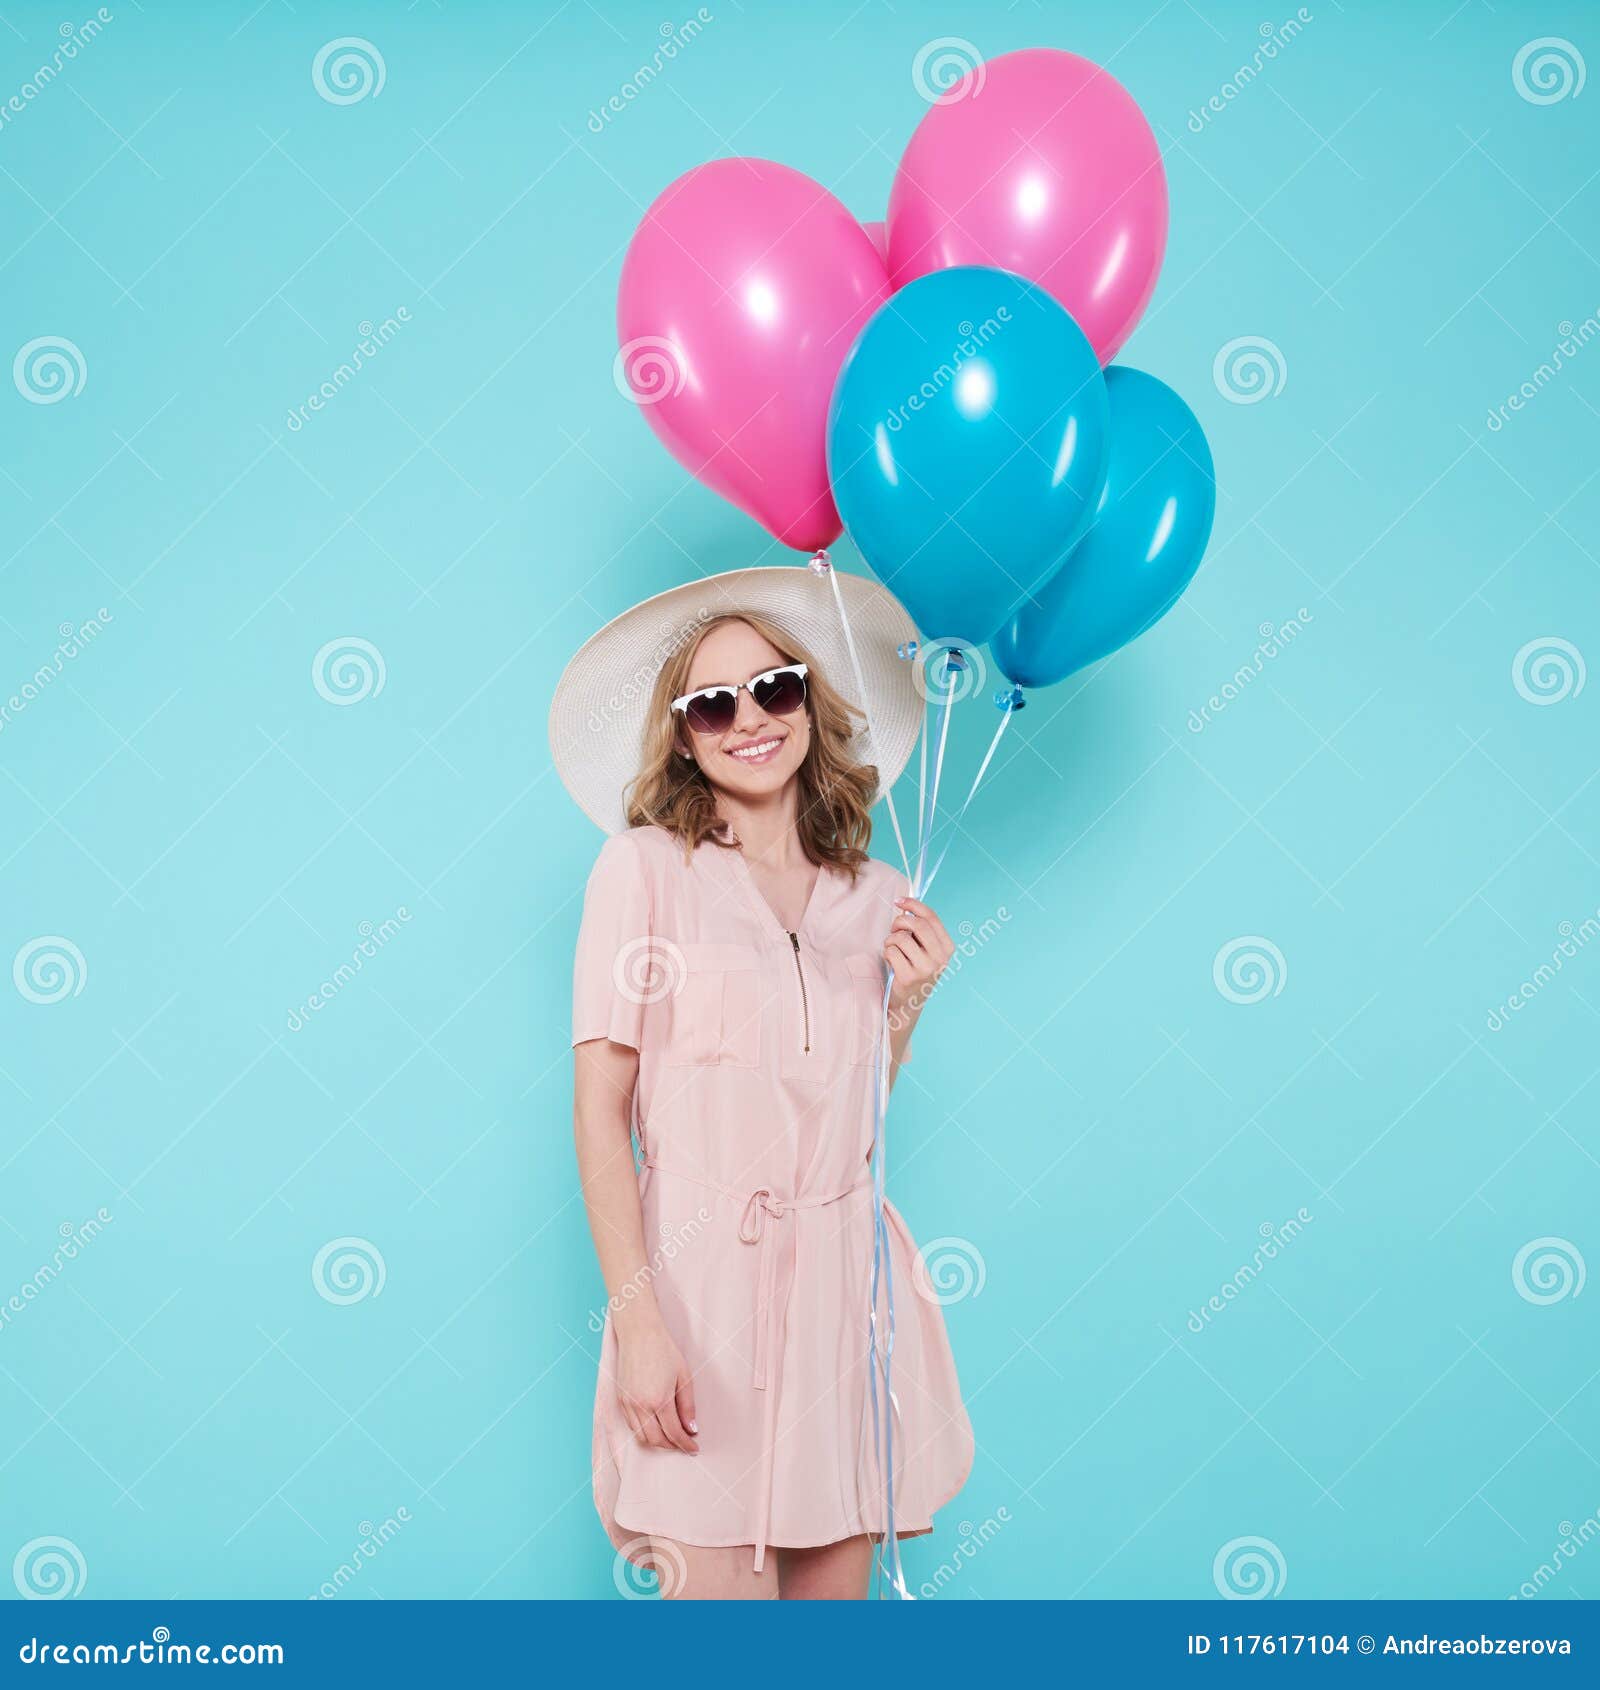 Gorgeous Young Woman in Party Summer Dress and Straw Hat Holding Bunch of Colourful Balloons, Isolated Over Pastel Blue. Stock - Image of adult, balloon: 117617104